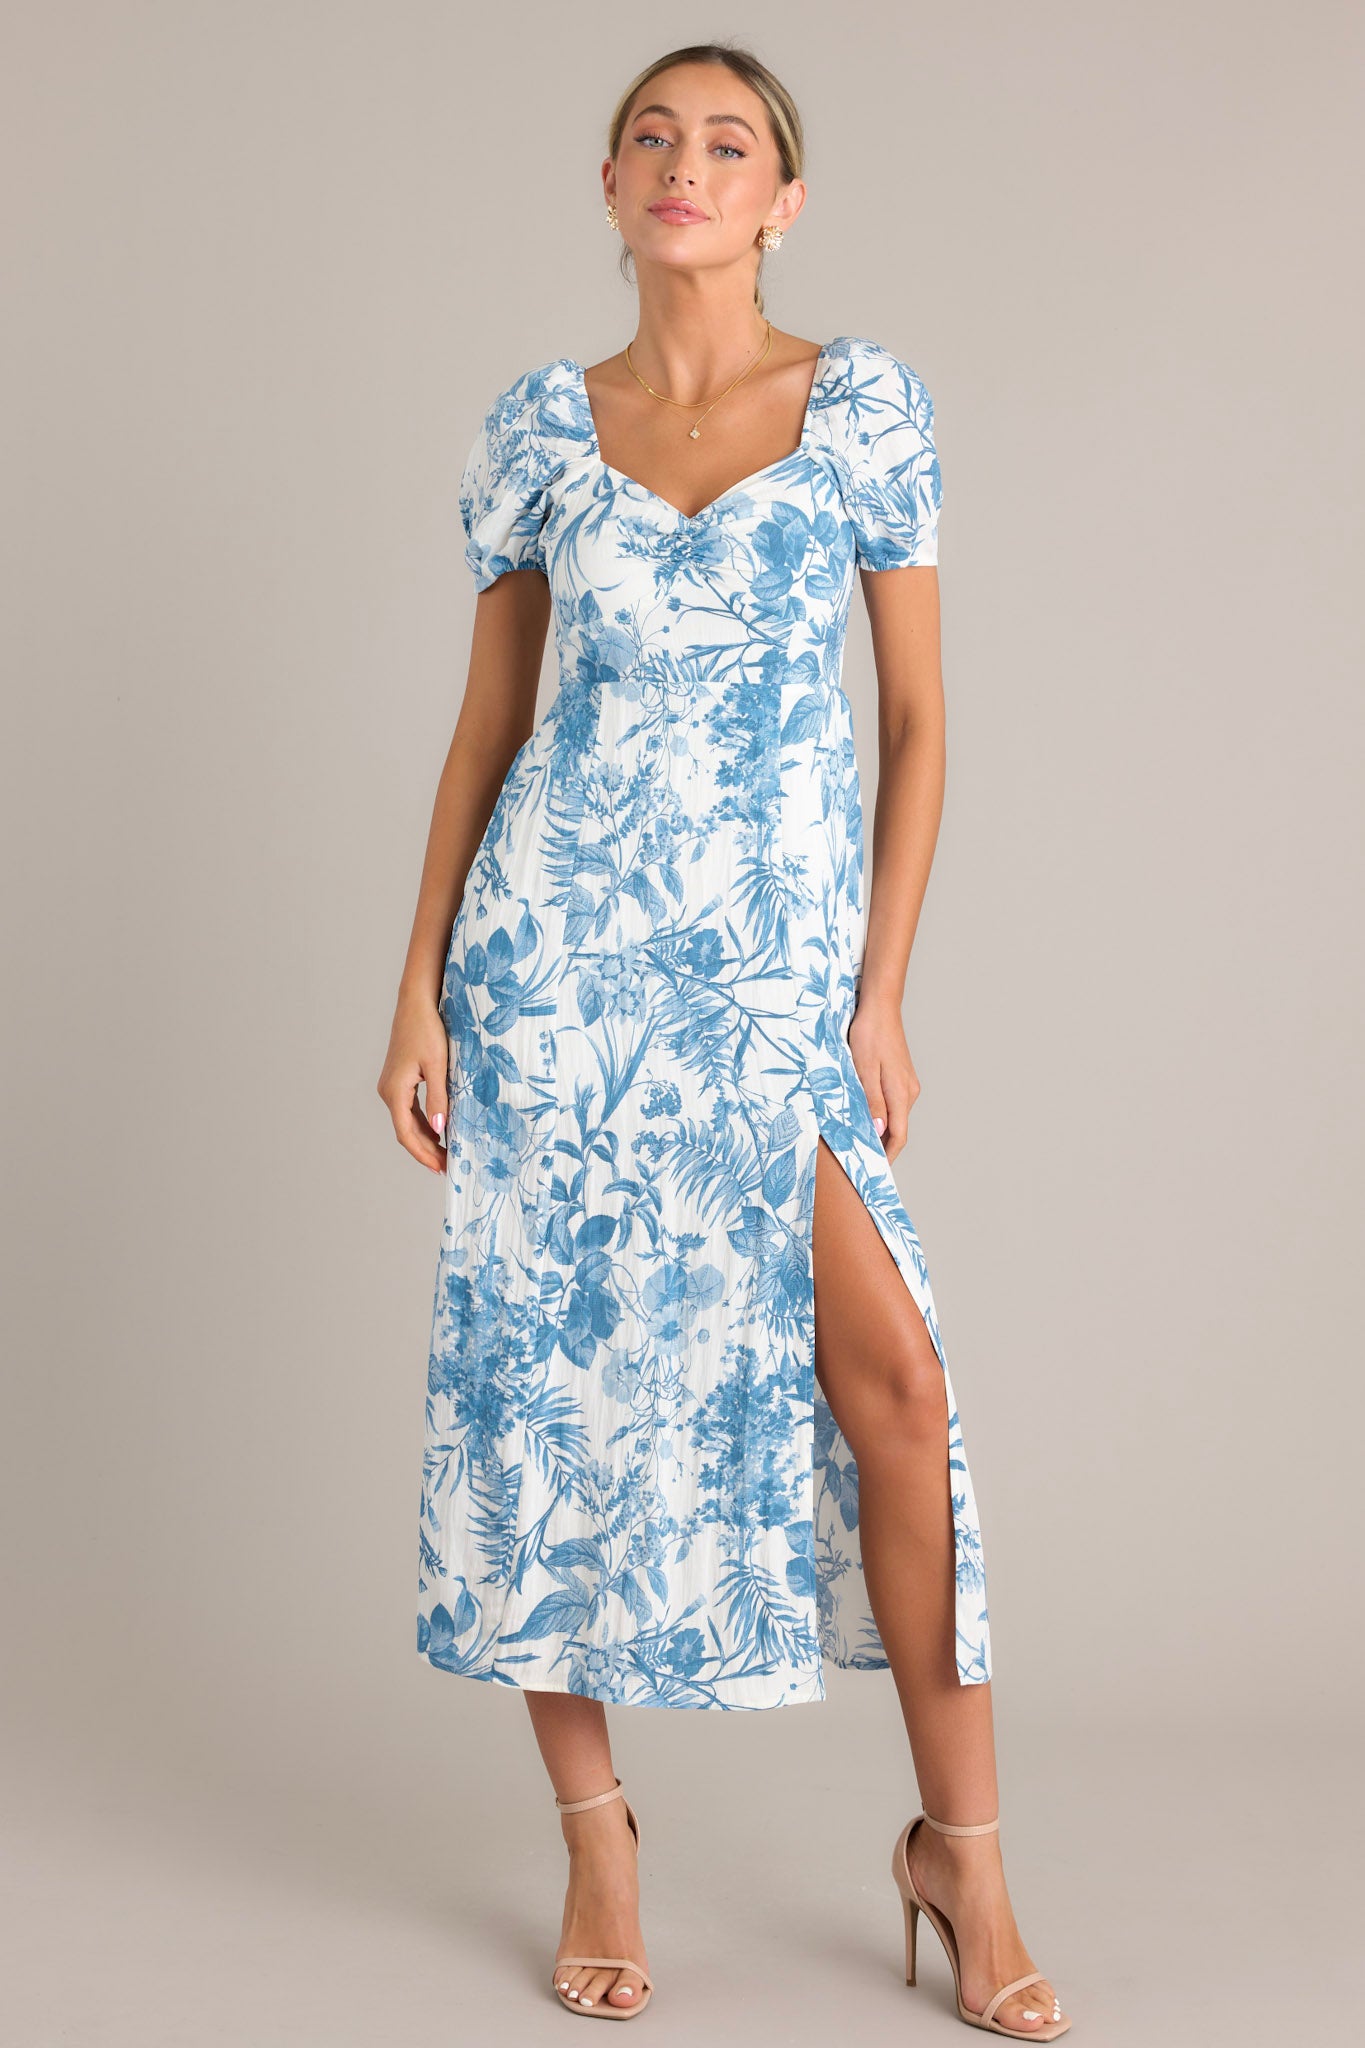 Blue floral midi dress showcasing short puff sleeves, a sweetheart neckline, fitted bodice, cinched waist, and a front slit on a mid-length skirt.